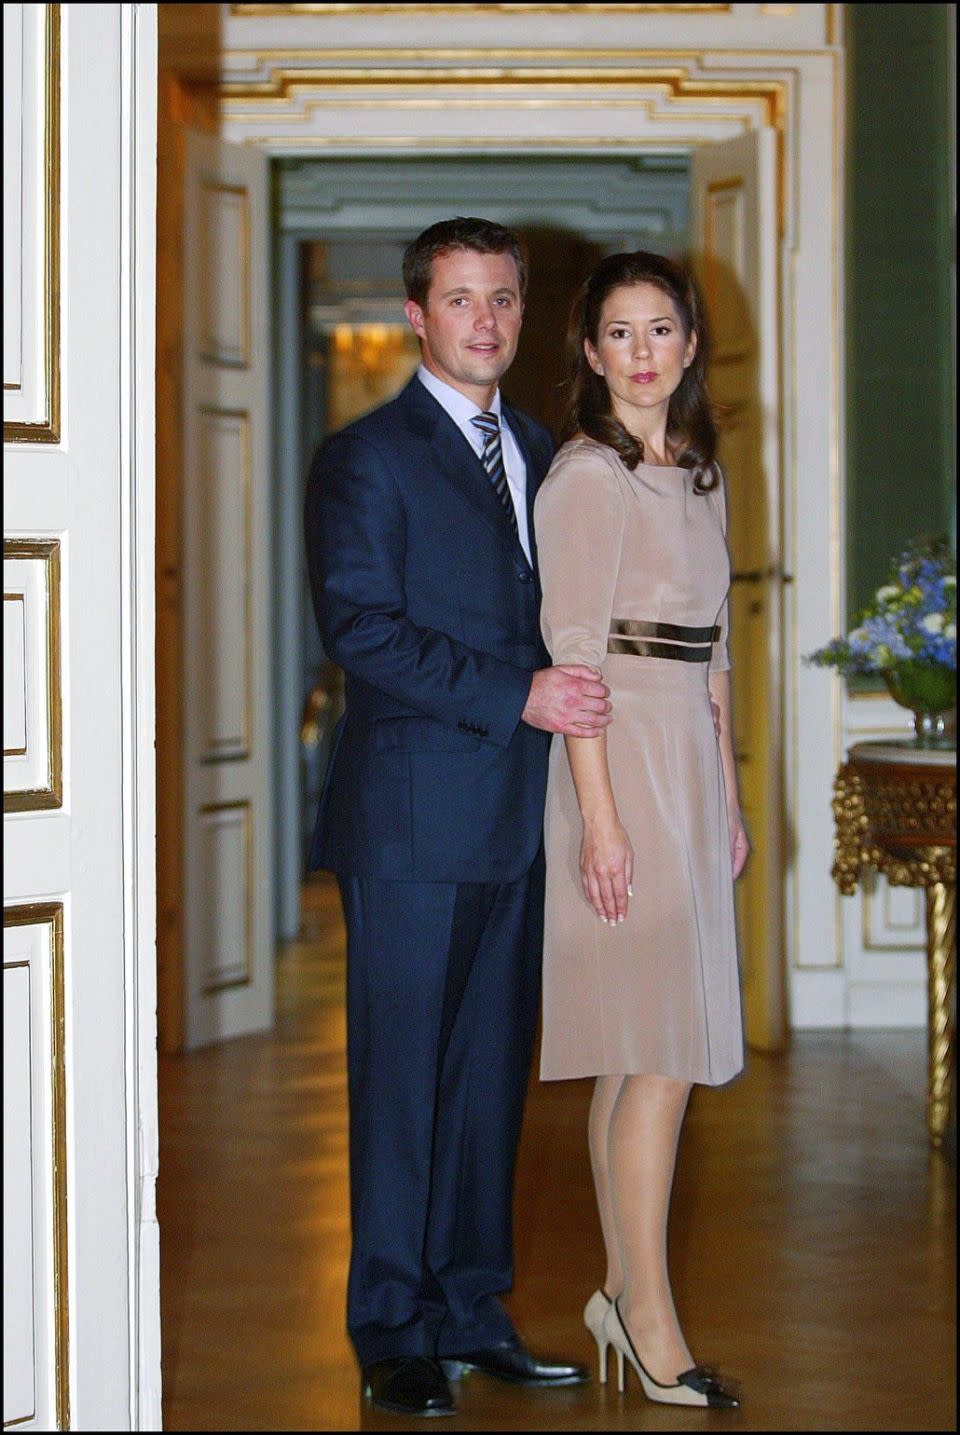 She said moving to Denmark was a massive change for her in 2004. Here she is pictured with Prince Frederik at their engagement shoot. Photo: Getty Images